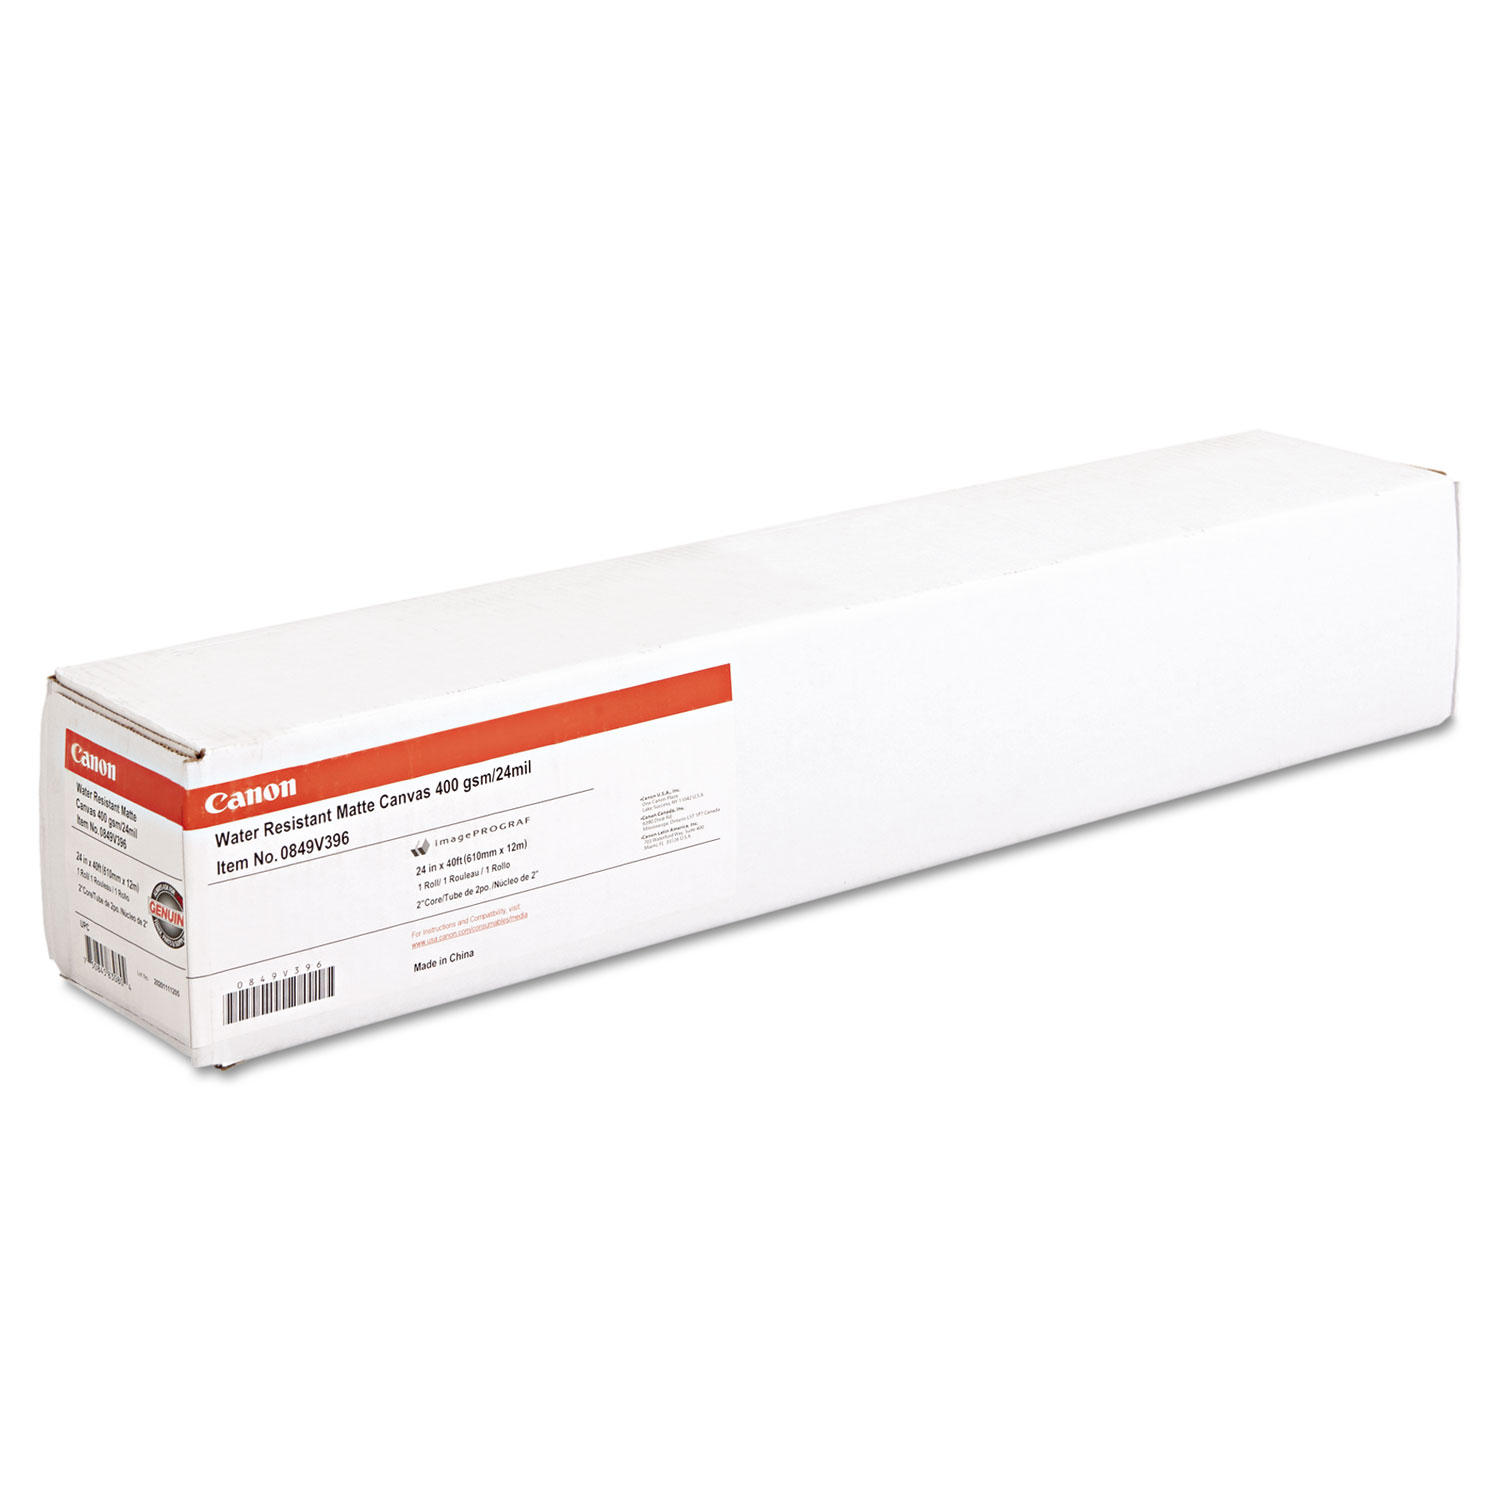  Canon 0849V39603 Water Resistant Matte Canvas Paper Roll, 24 mil, 24 x 40 ft, Matte White (CNM0849V39603) 